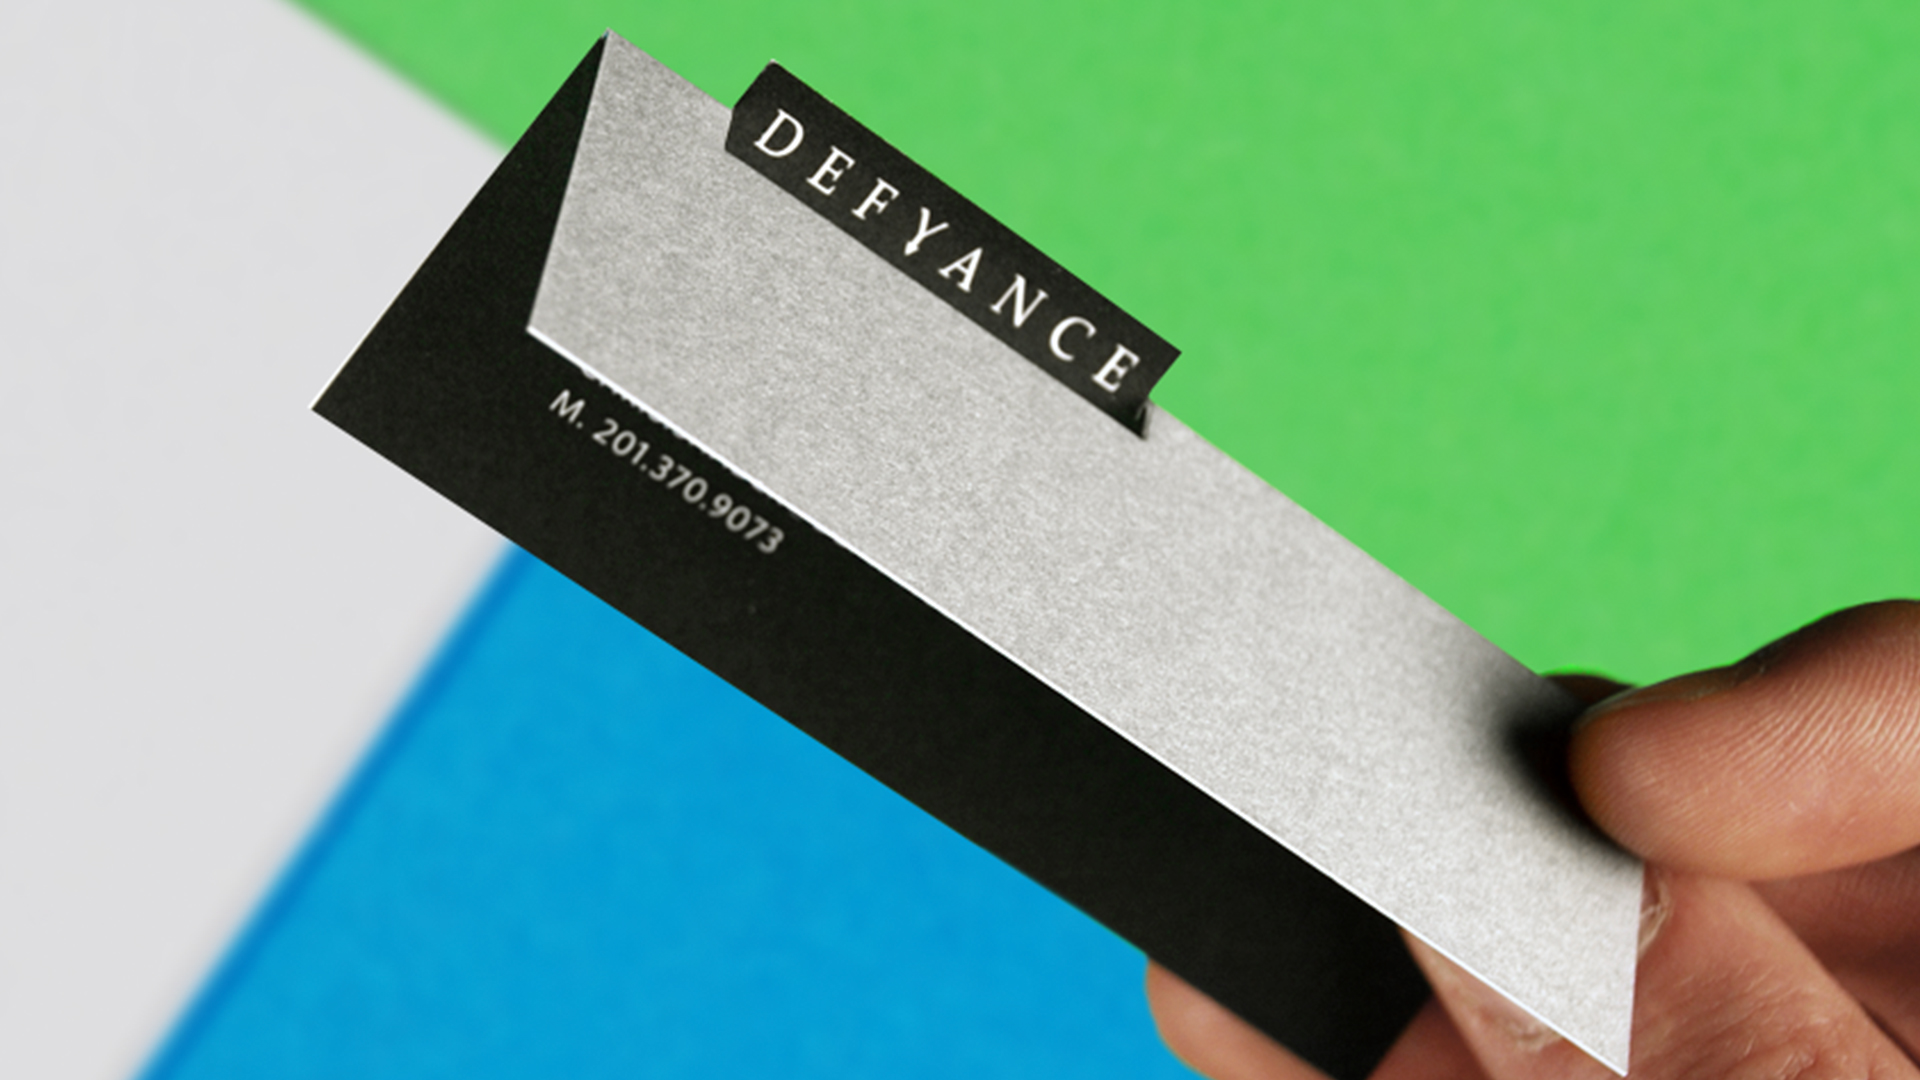 Defyance business card design created by Incubate Design